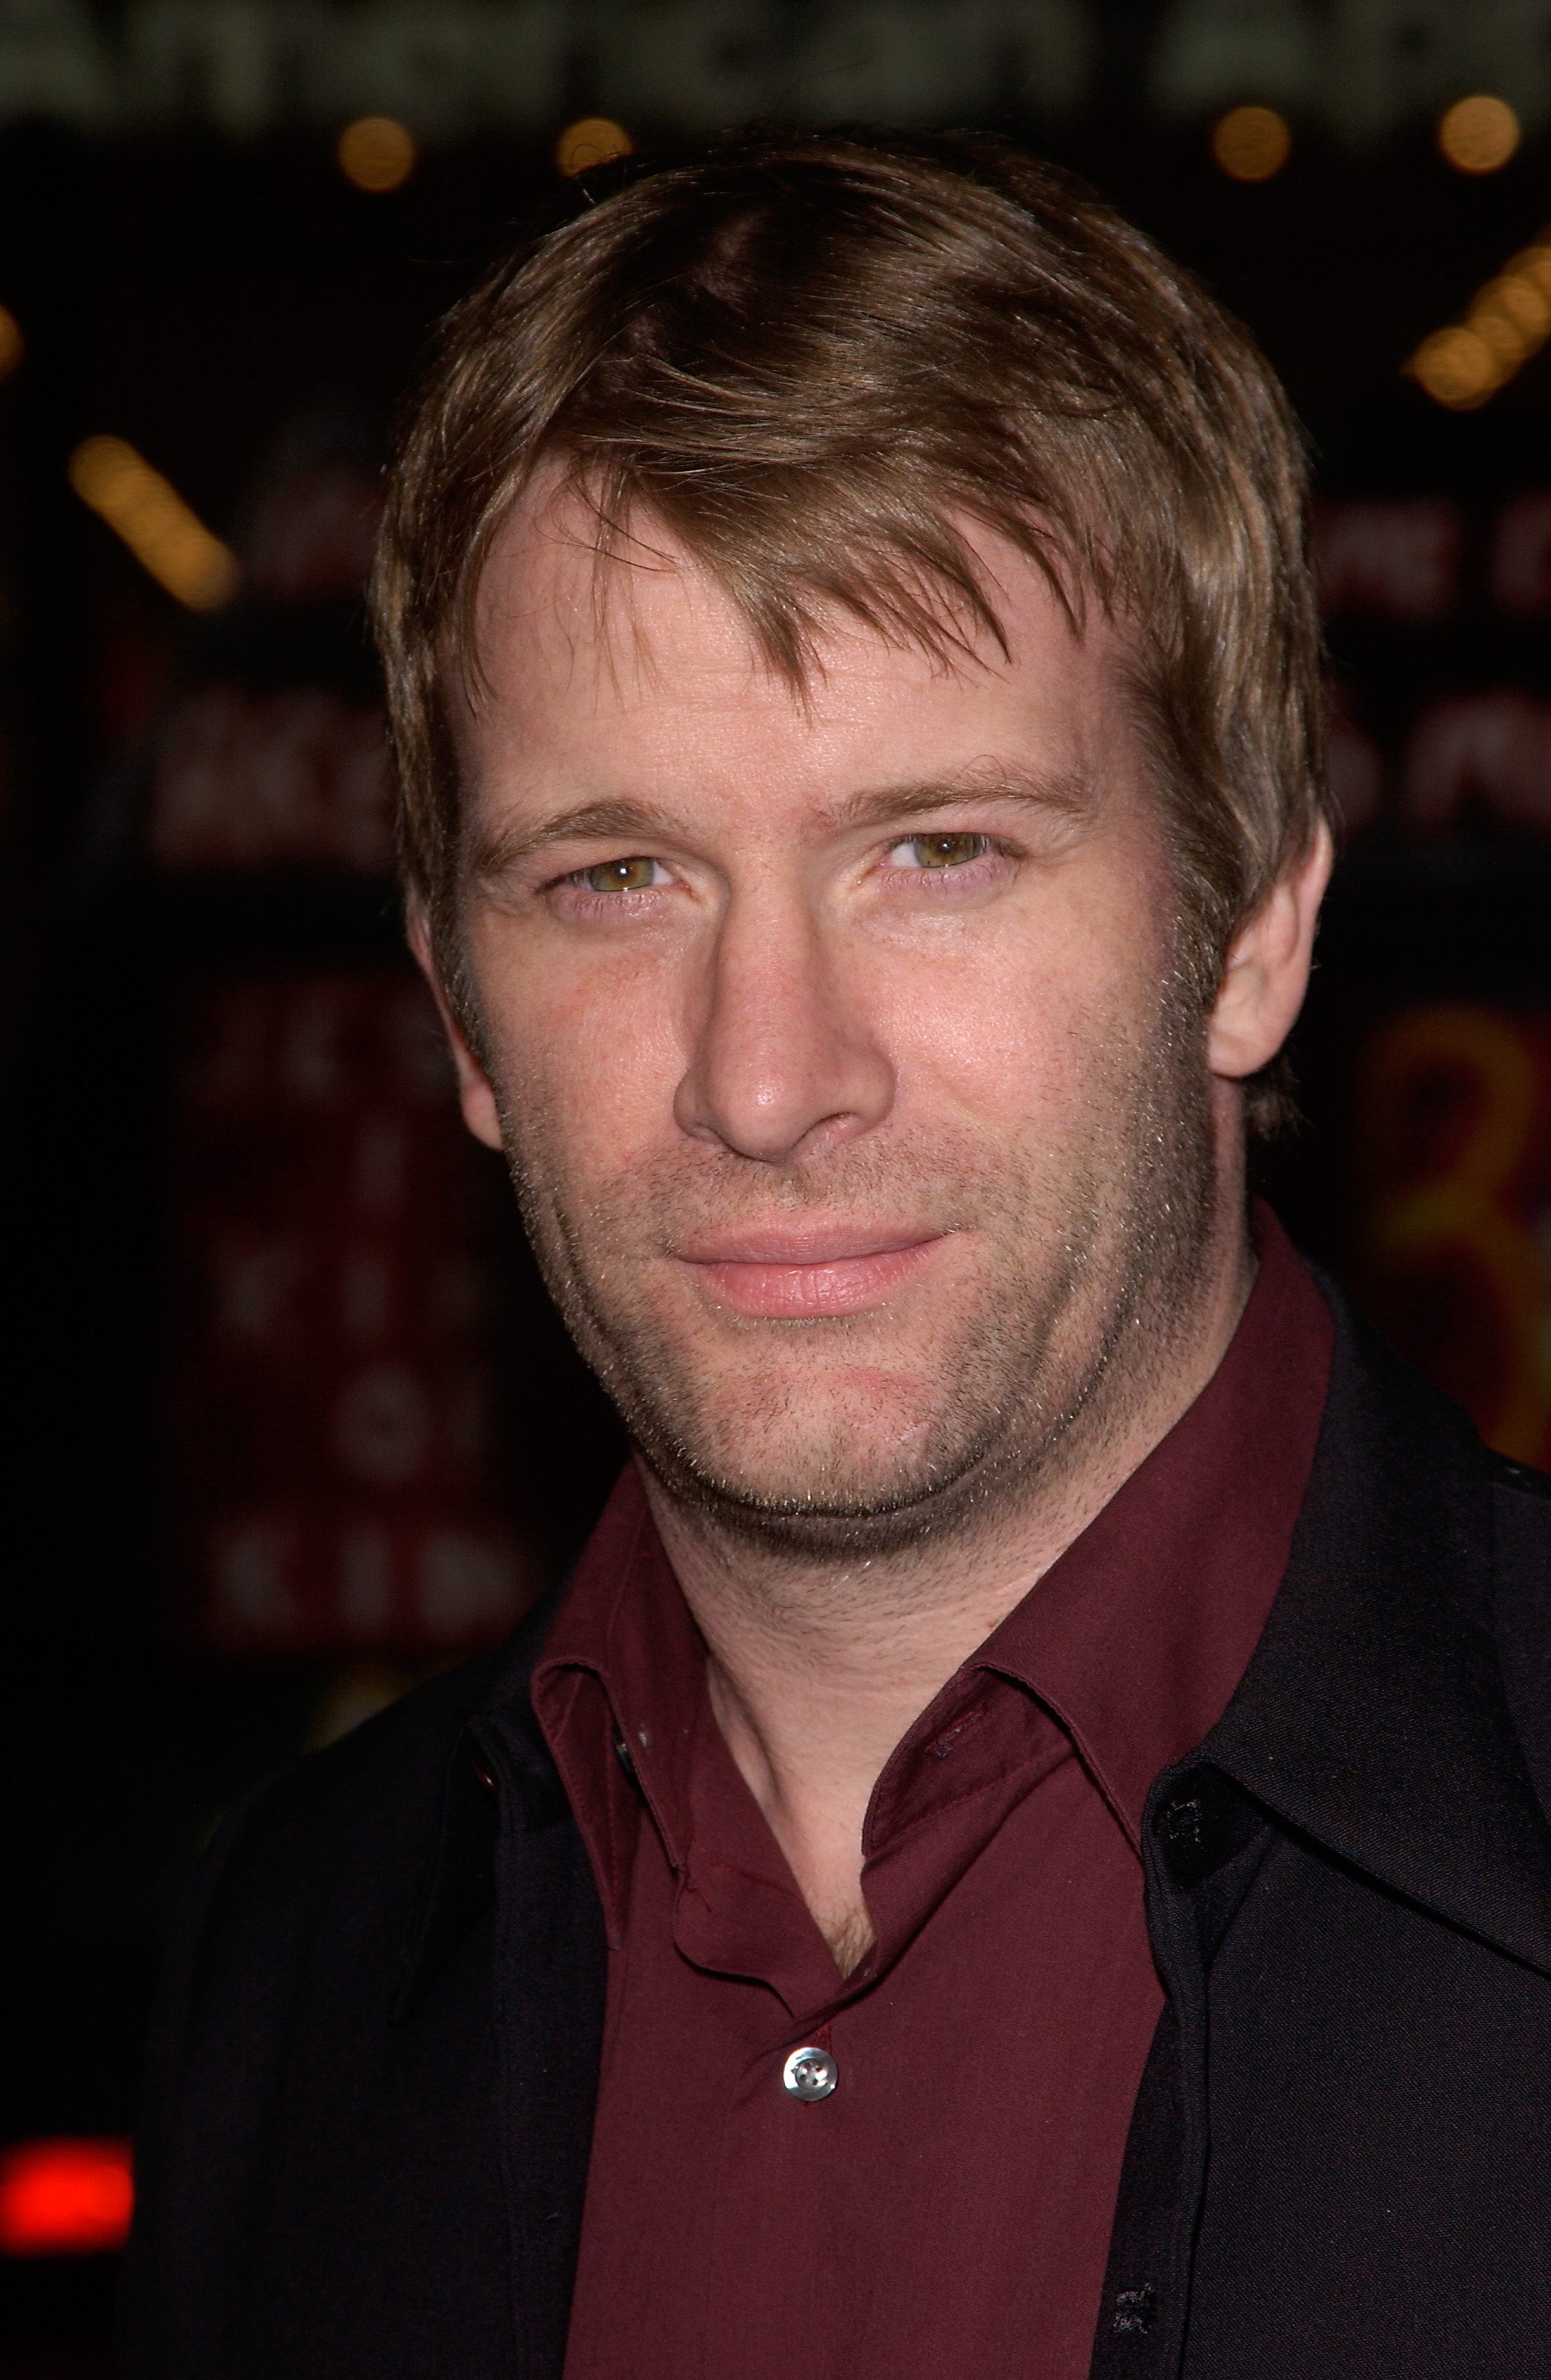 Pictures of Thomas Jane, Picture #270246 - Pictures Of Celebrities